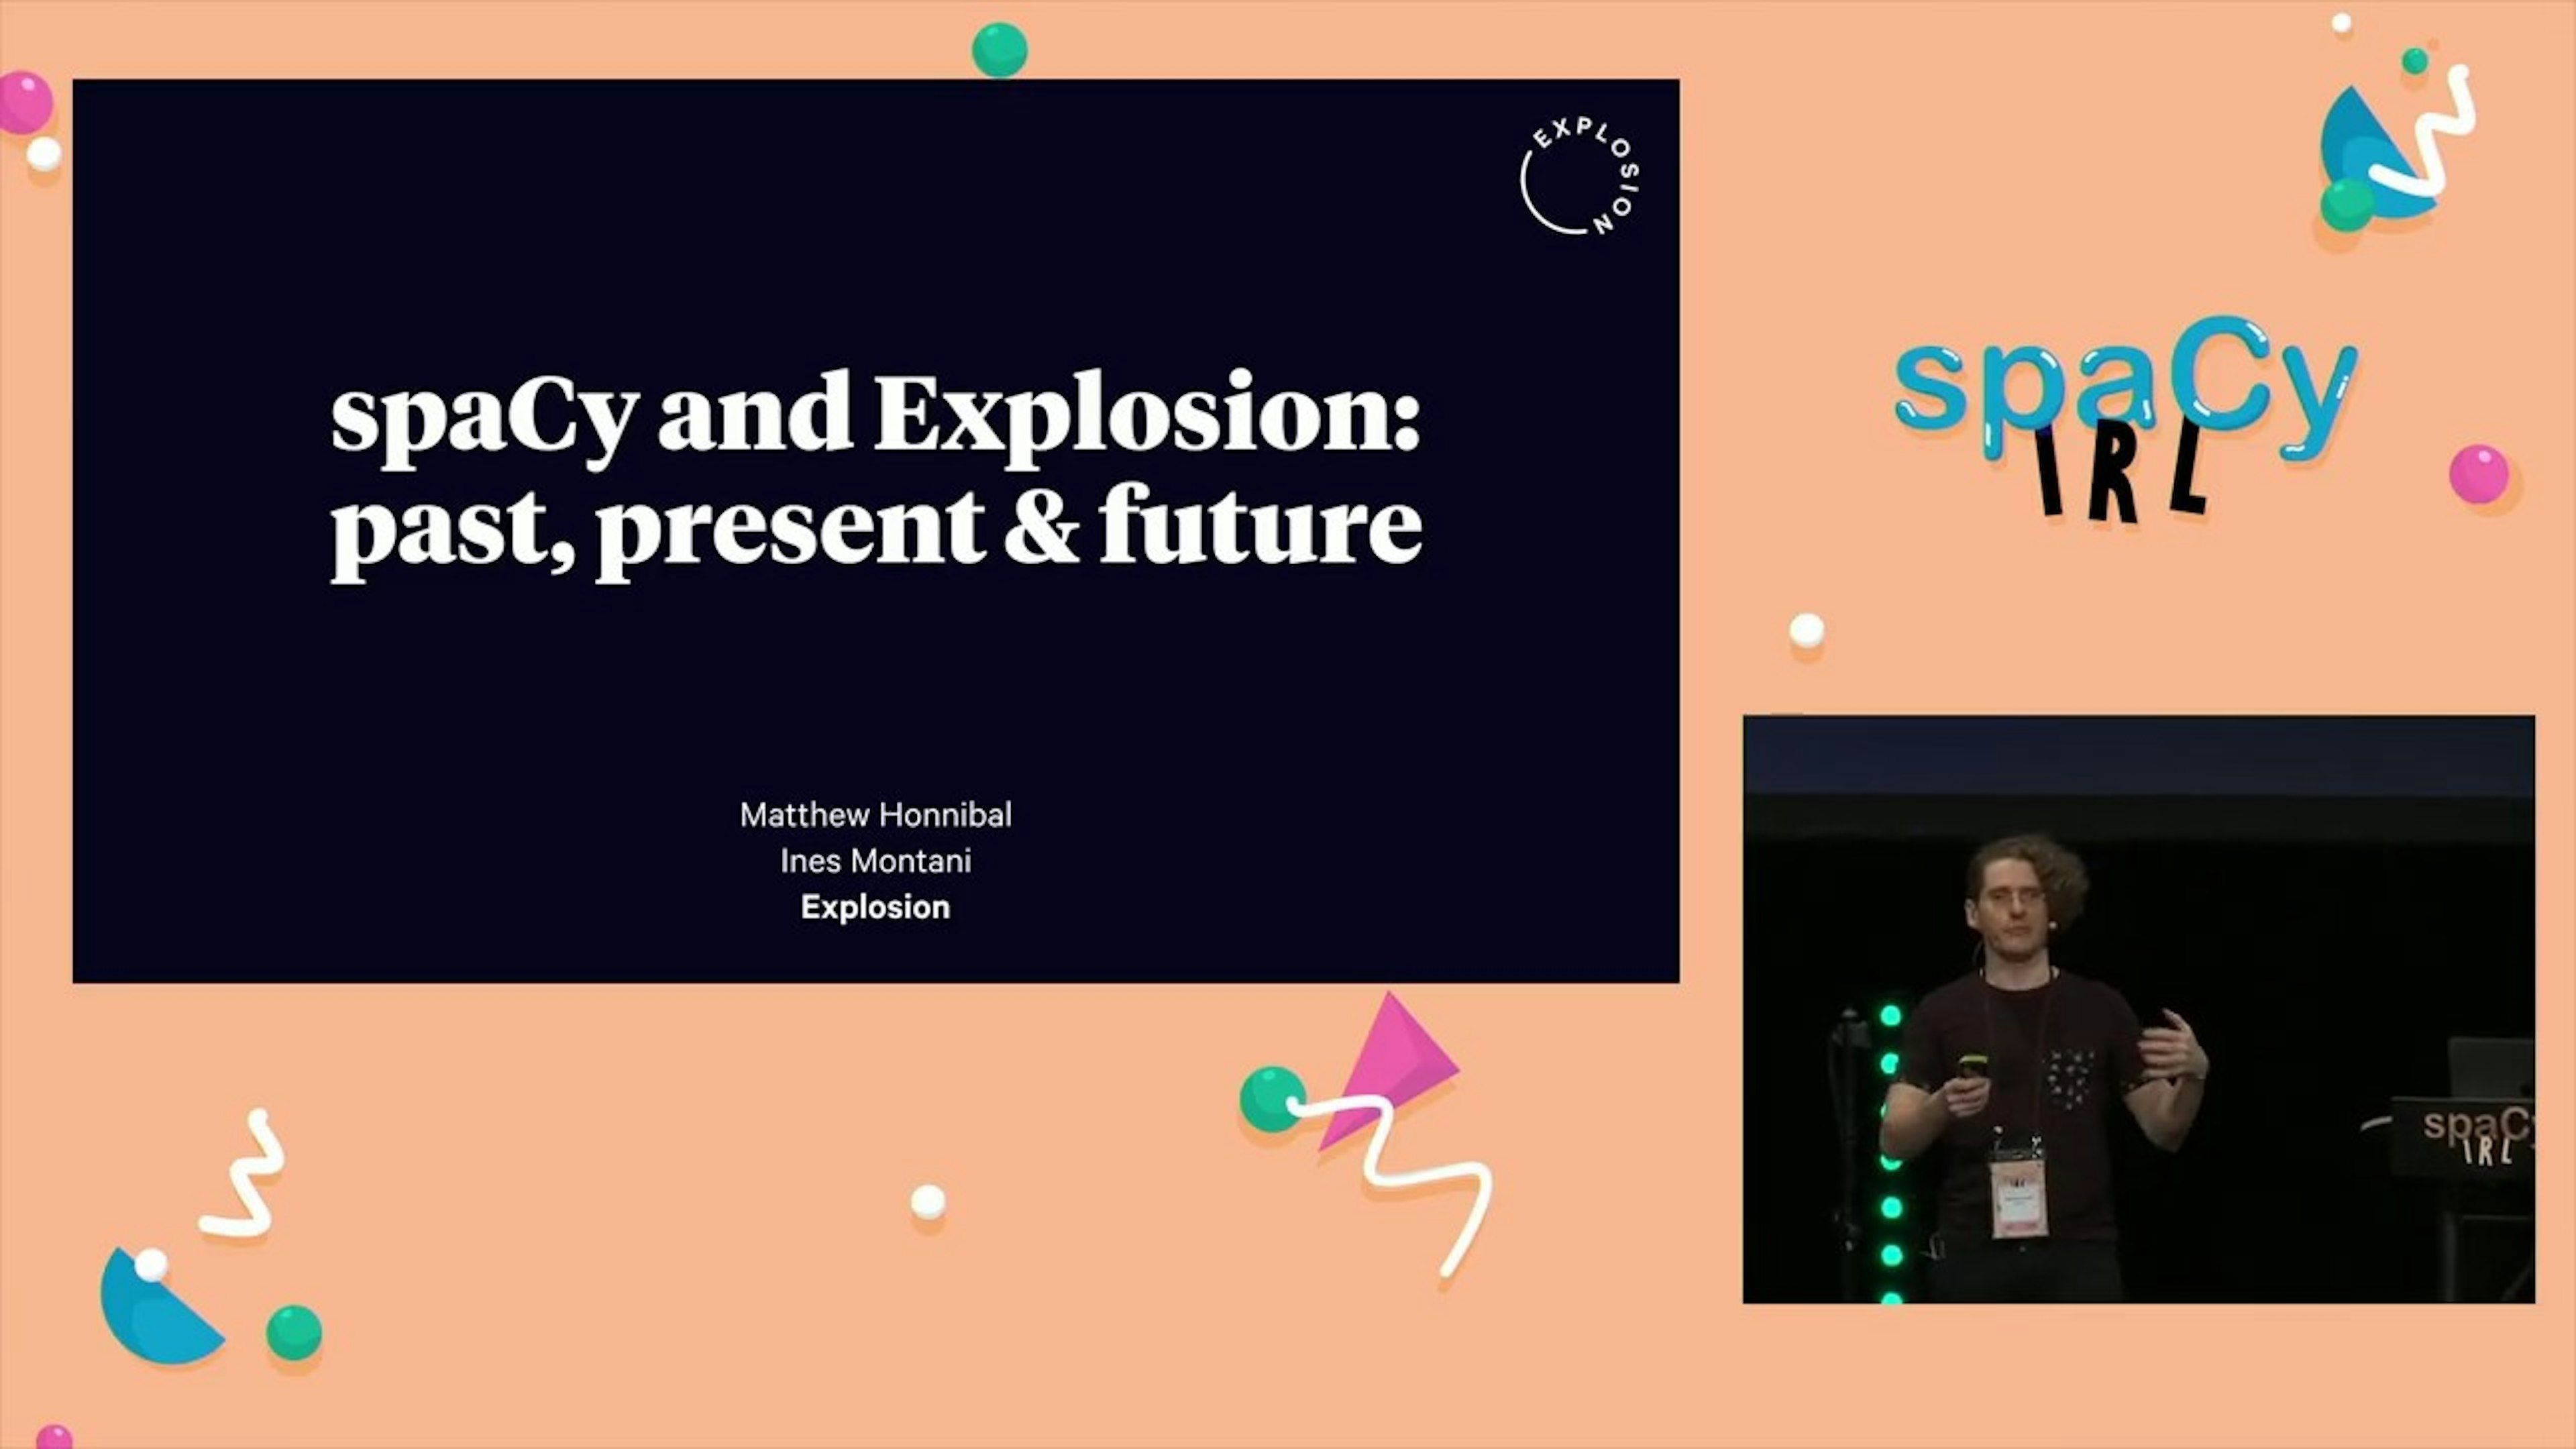 spaCy and Explosion: past, present & future